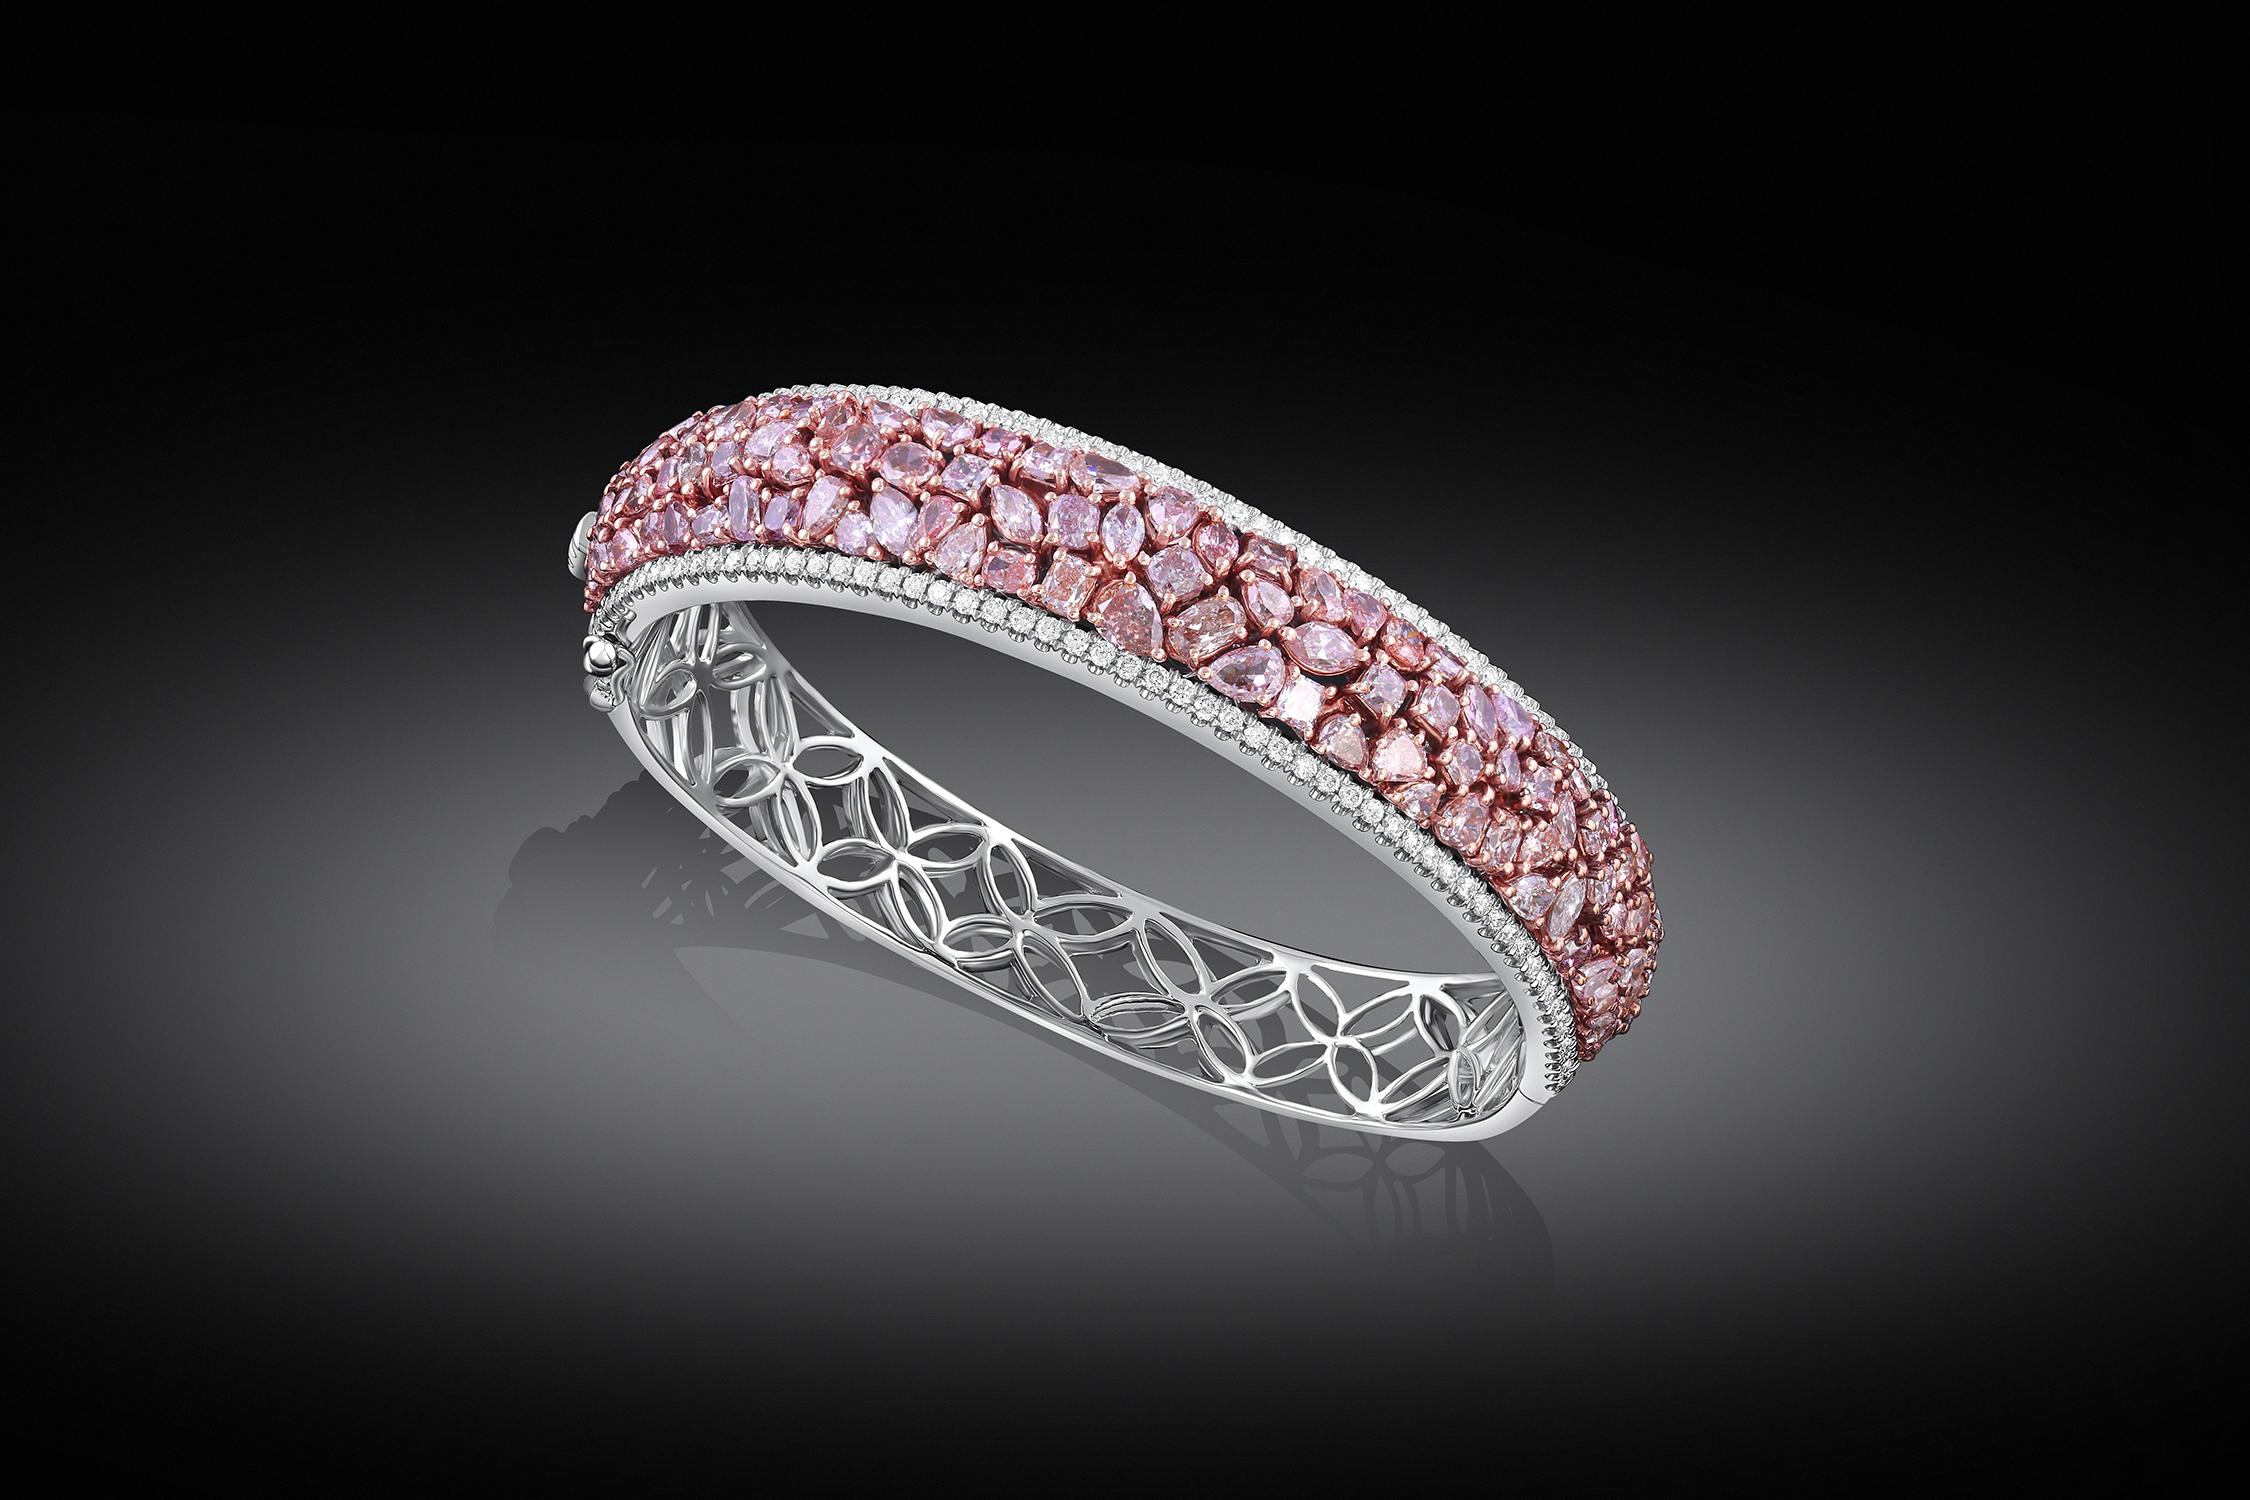 18 Karat Gold 9.47 Carat Total Weight Pink and White Diamond Bangle Bracelet In Excellent Condition For Sale In La Jolla, CA